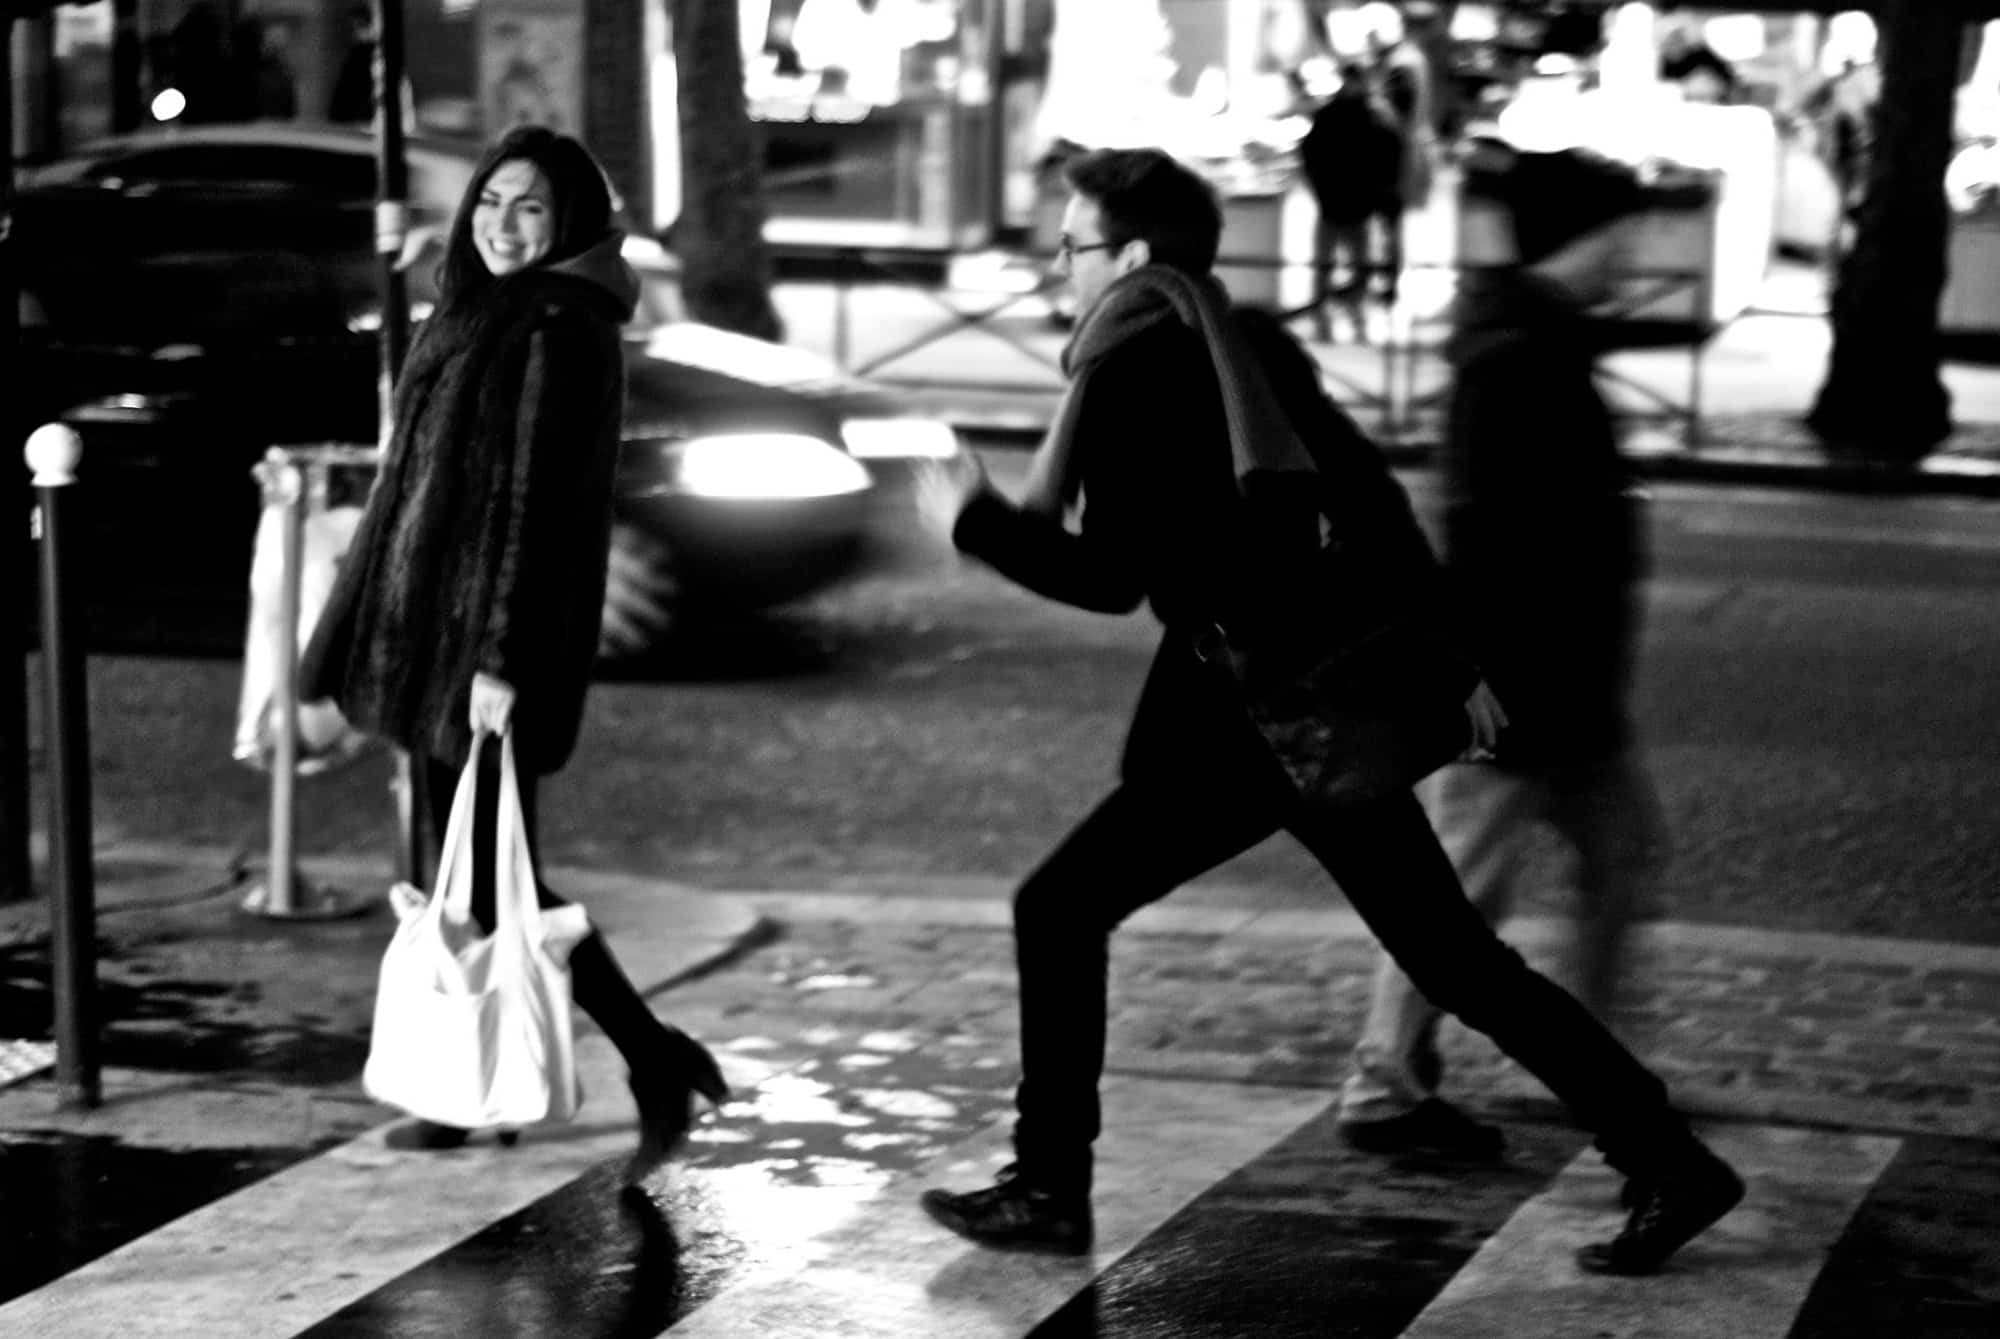 A man and a woman are crossing the street with the woman smiling playfully and the man appearing to run after her.